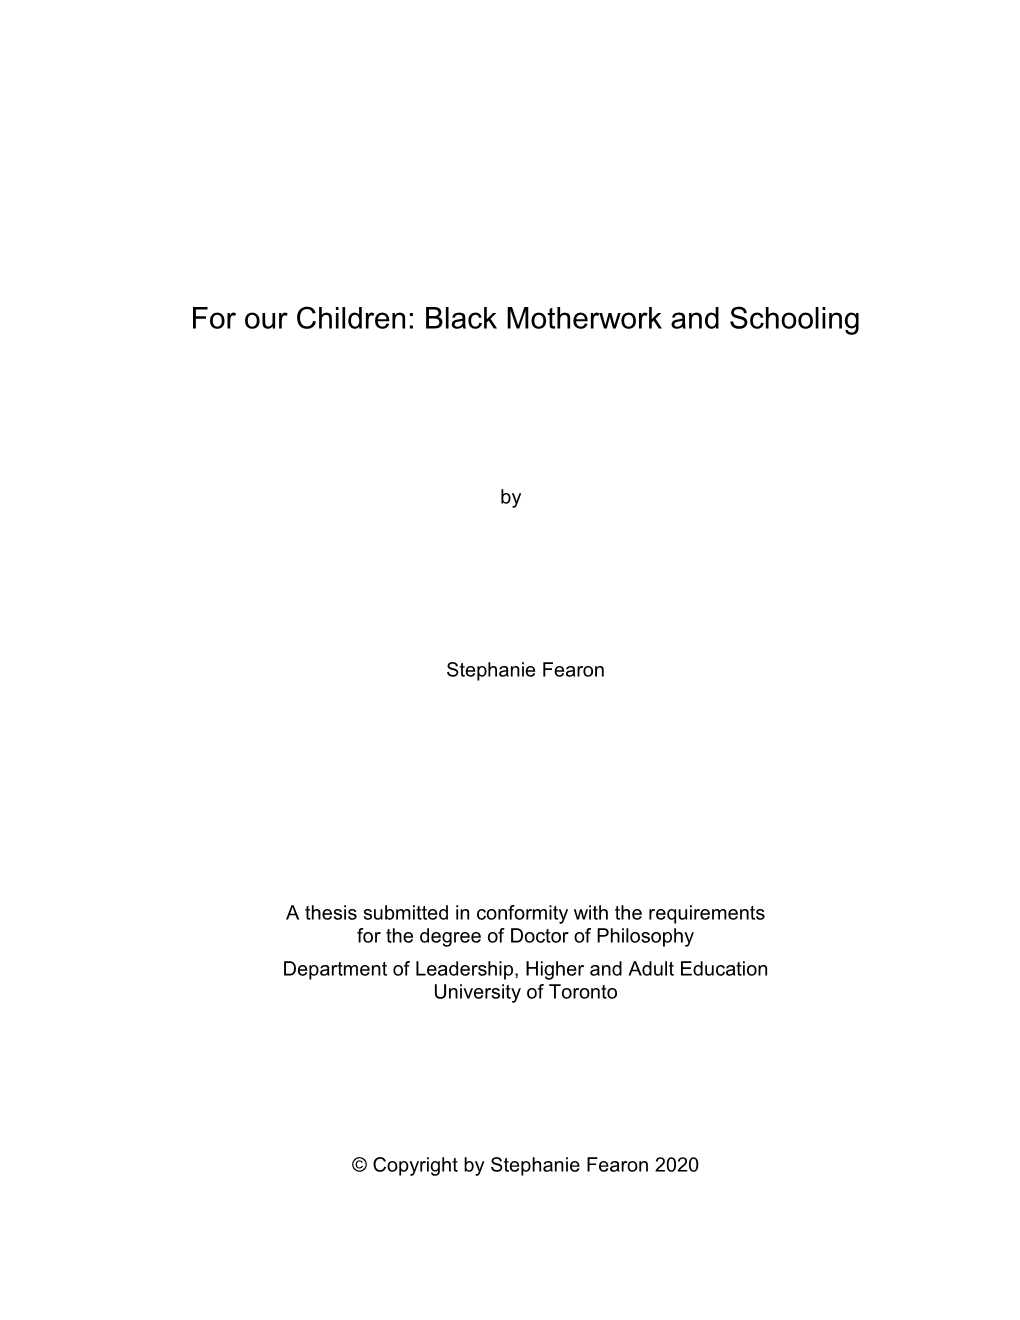 For Our Children: Black Motherwork and Schooling